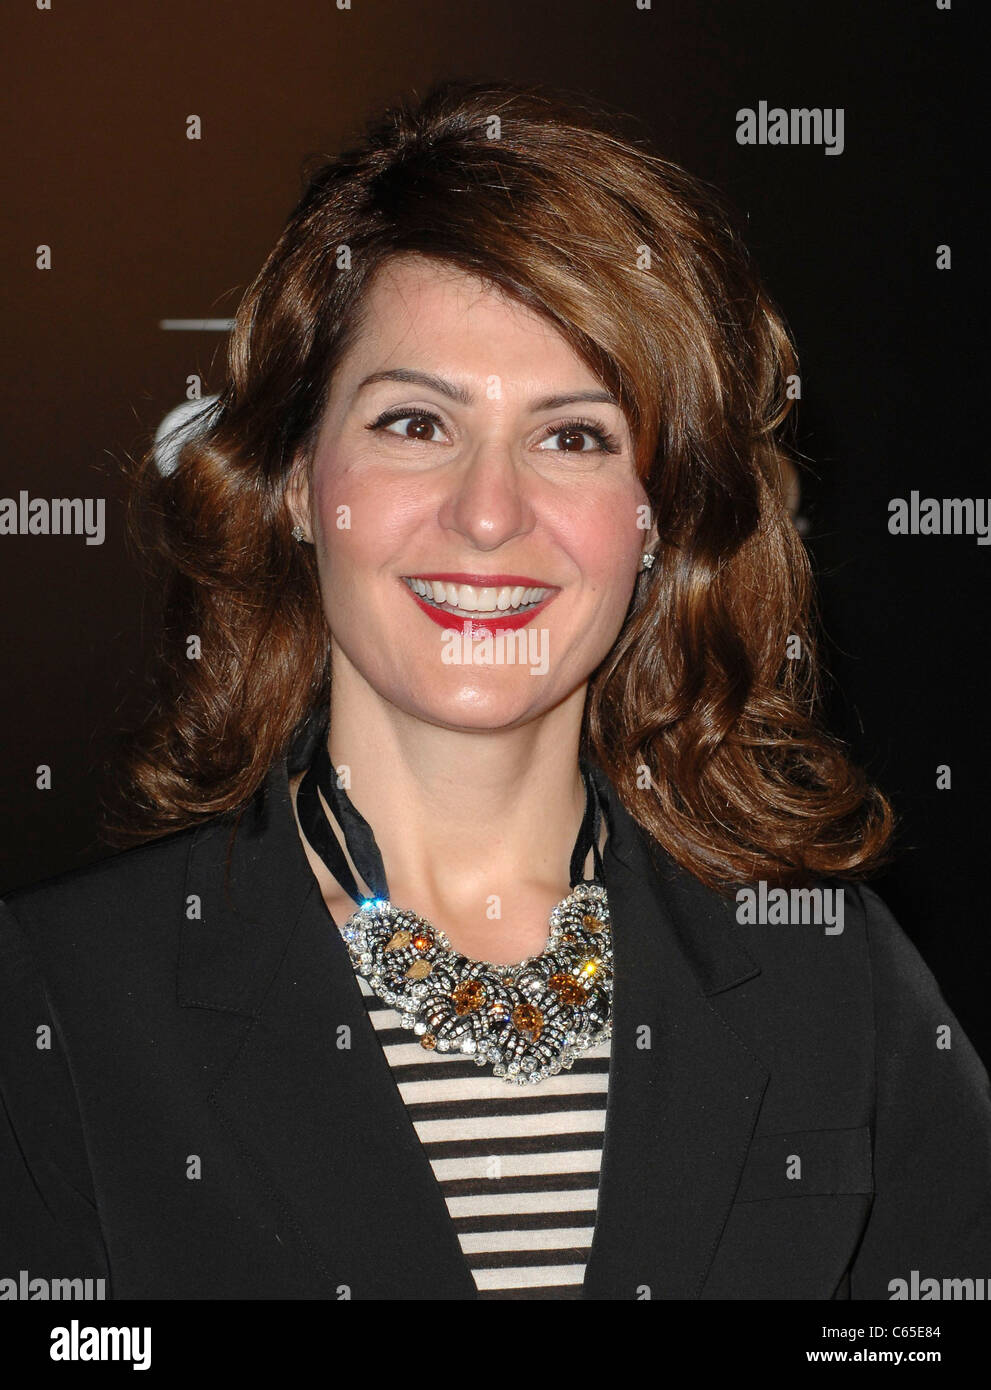 Nia Vardalos at arrivals for BIUTIFUL Premiere, Directors Guild of America (DGA) Theater, Los Angeles, CA December 14, 2010. Photo By: Elizabeth Goodenough/Everett Collection Stock Photo